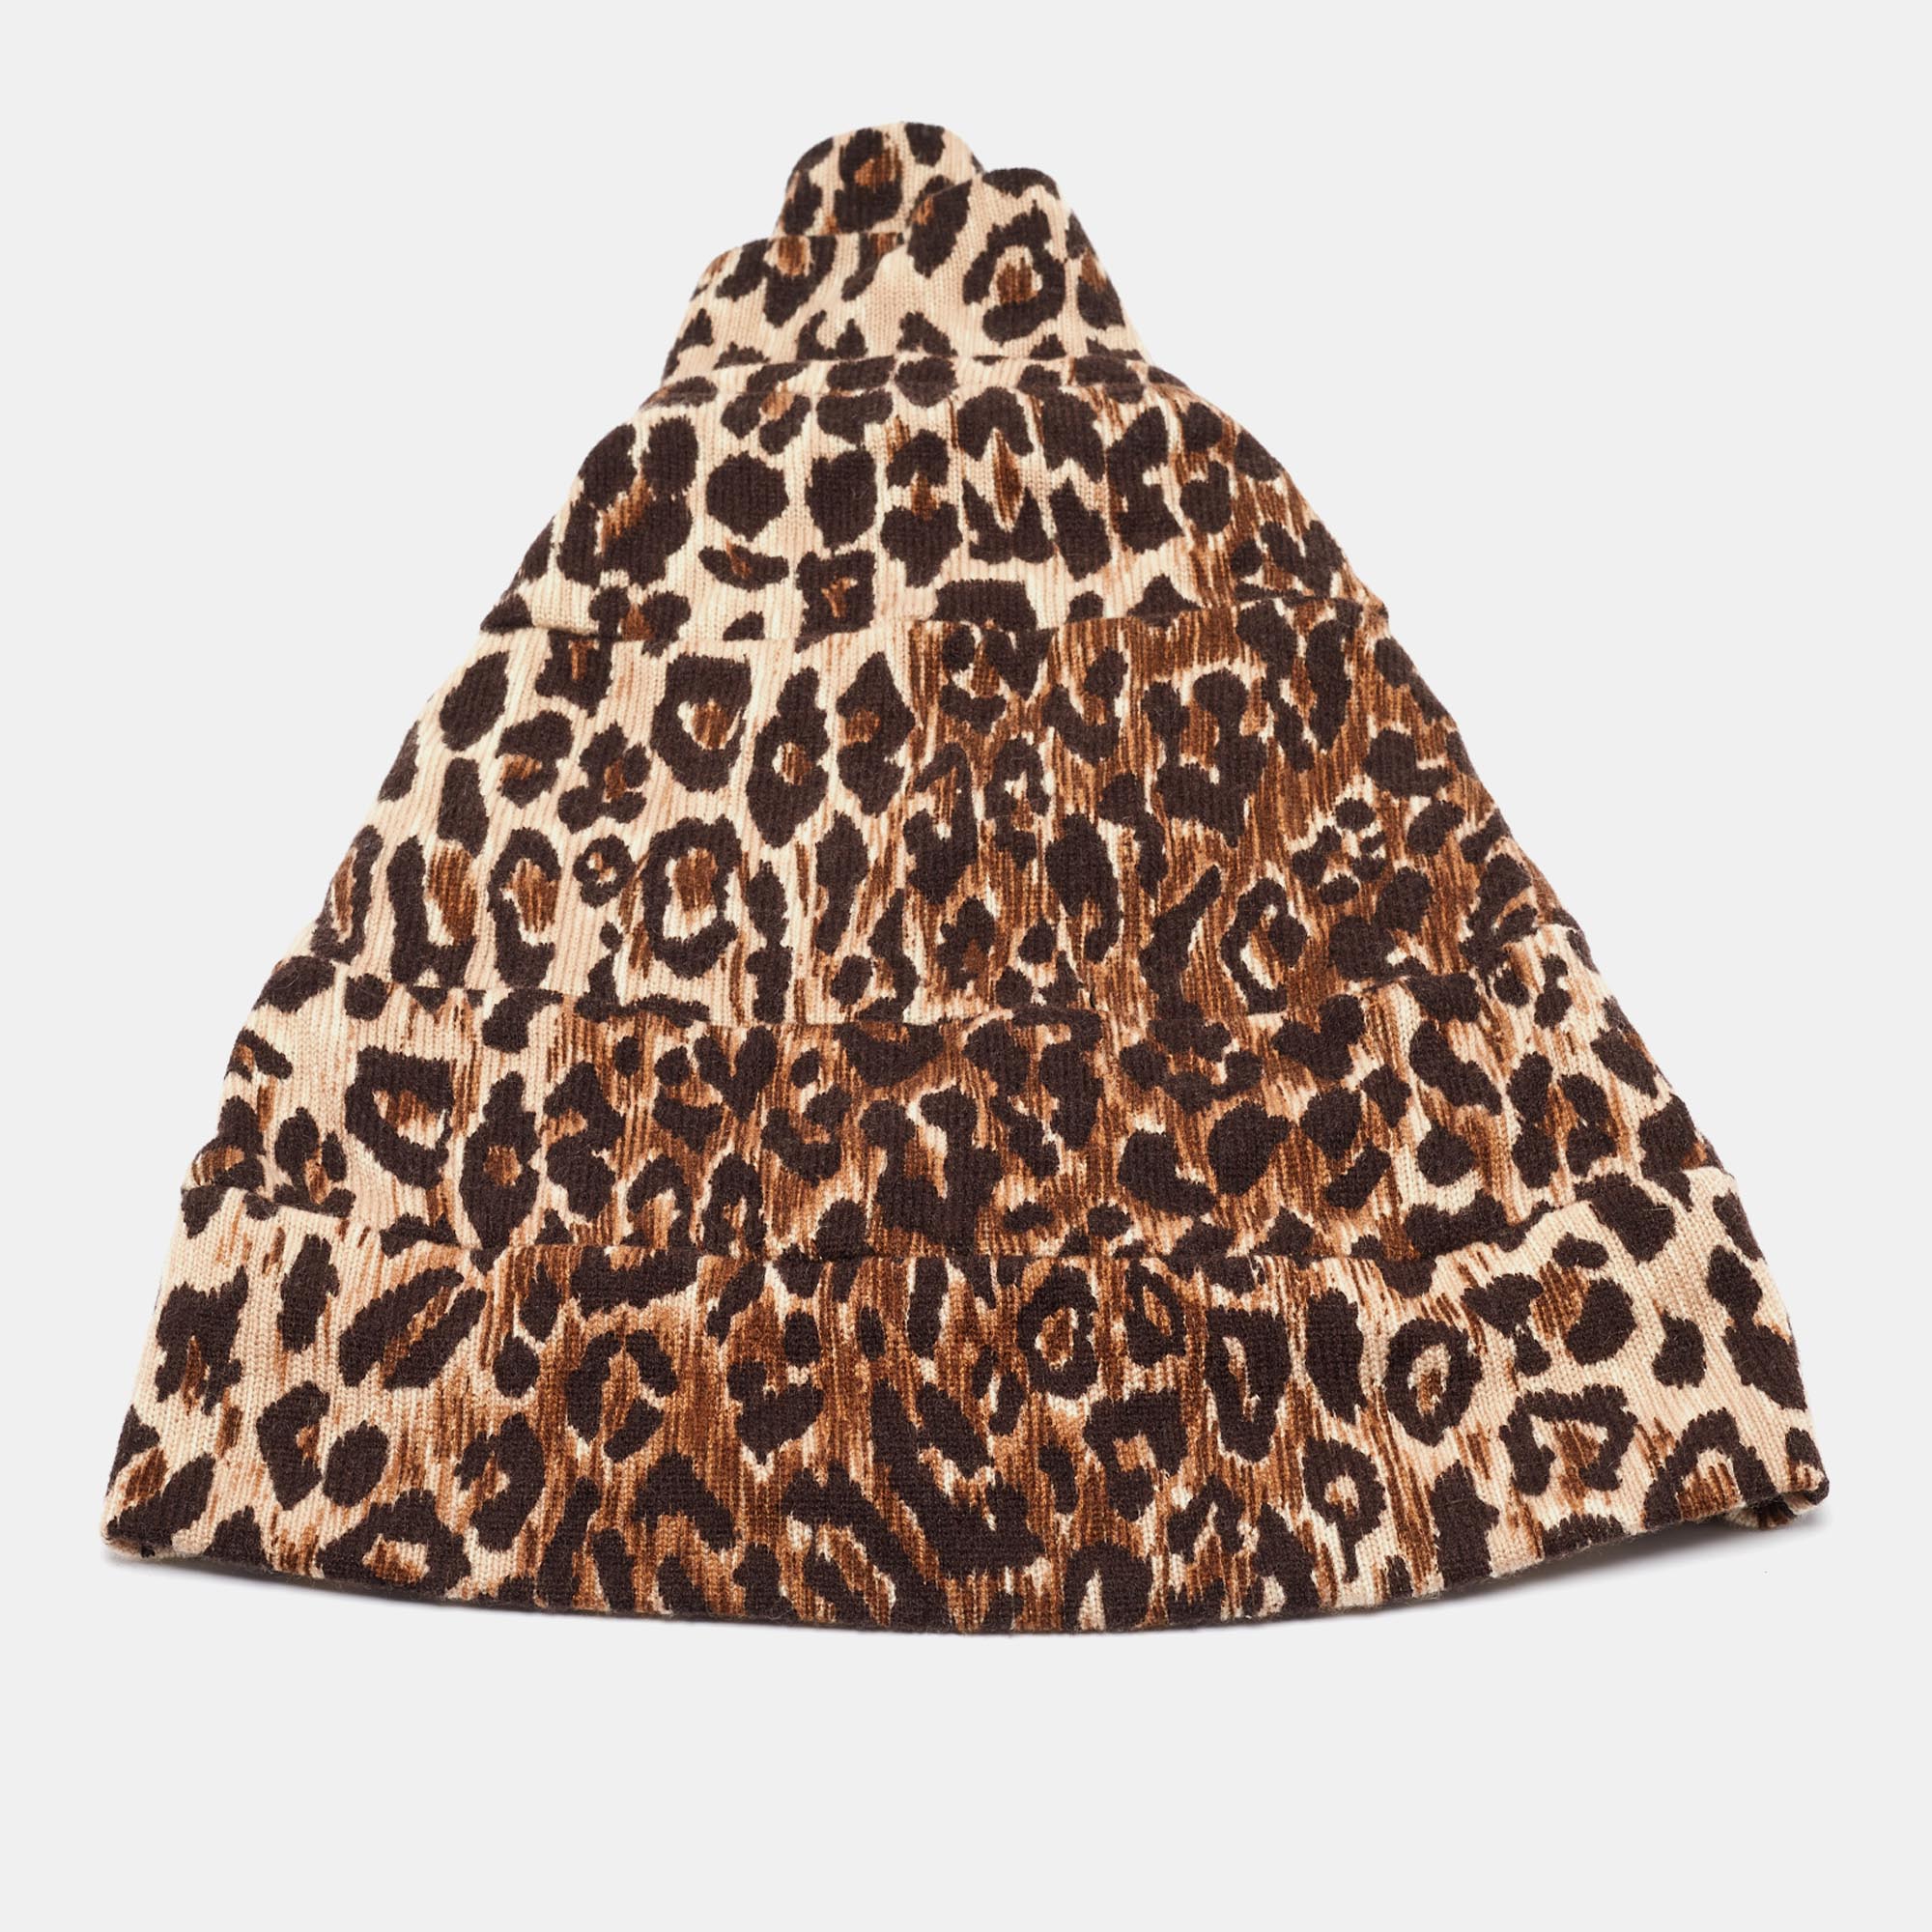 Pre-owned Dolce & Gabbana Brown Leopard Pattern Cashmere Tiered Beanie Hat Size 57